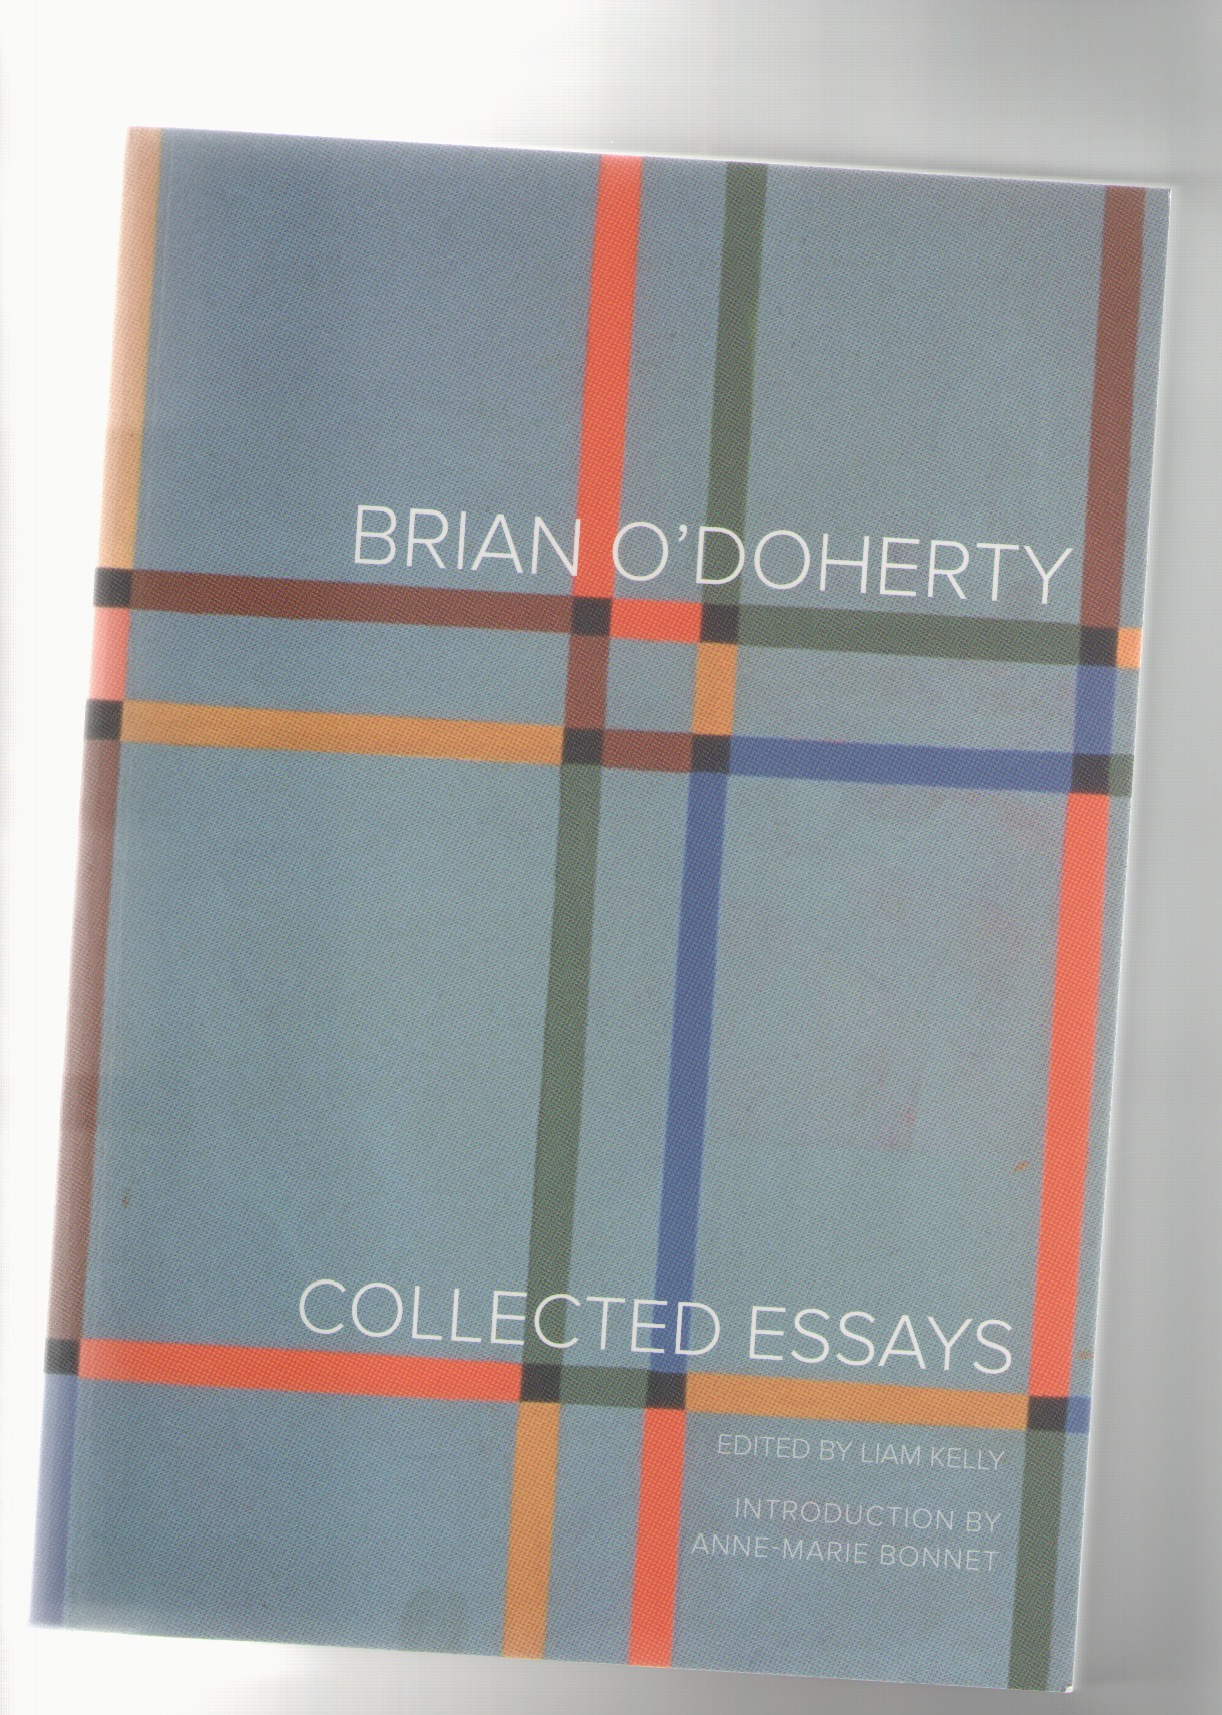 O'DOHERTY, Brian - Collected Essays